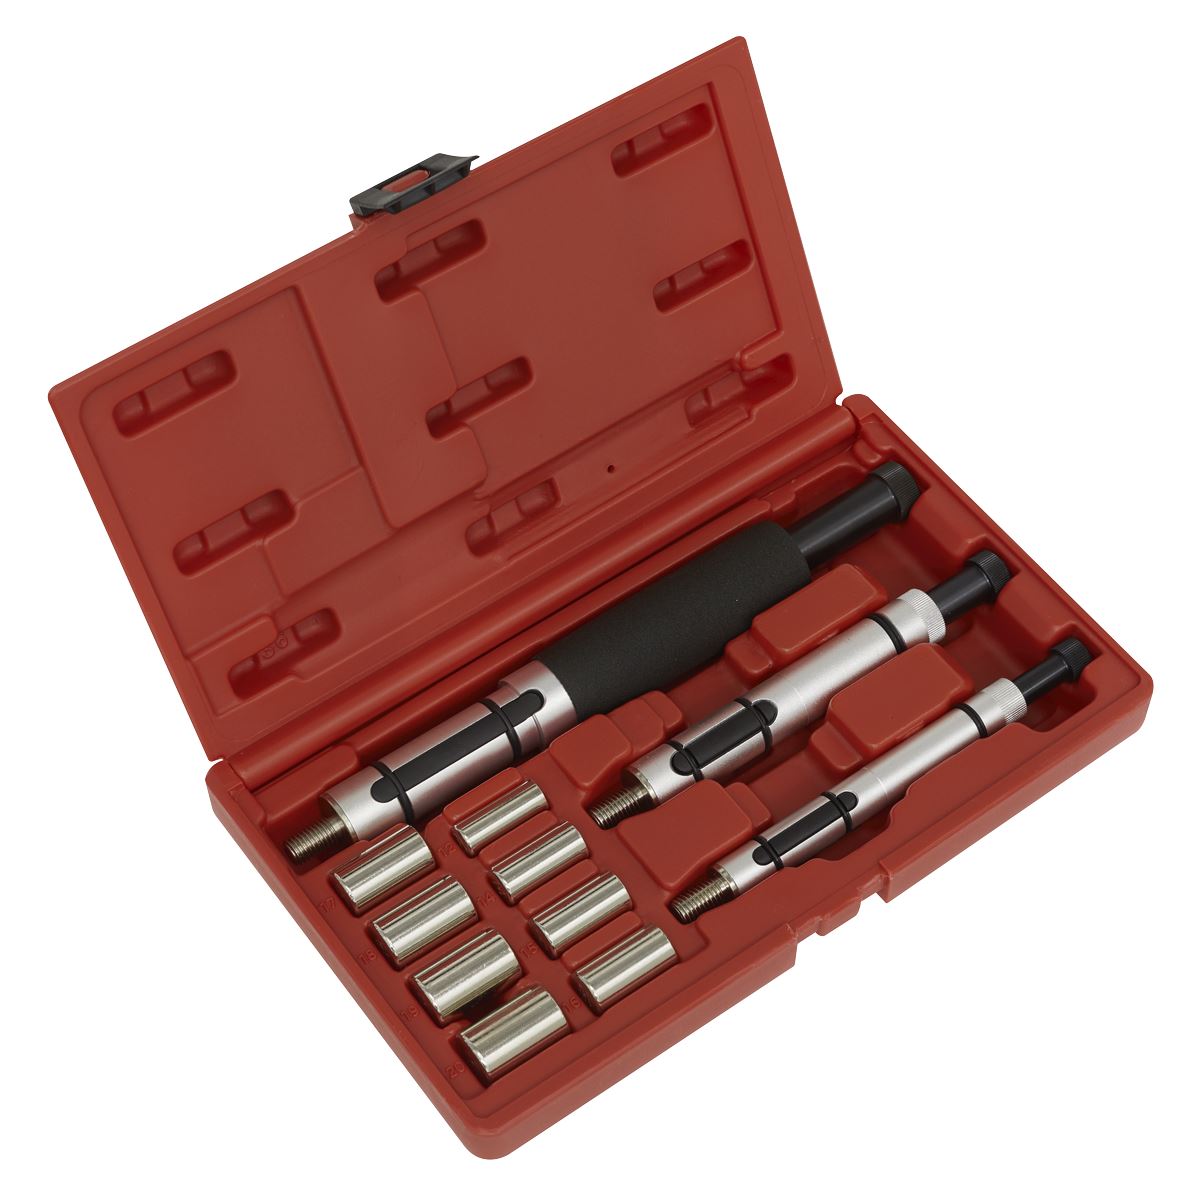 Sealey Clutch Alignment Tool Set 11pc